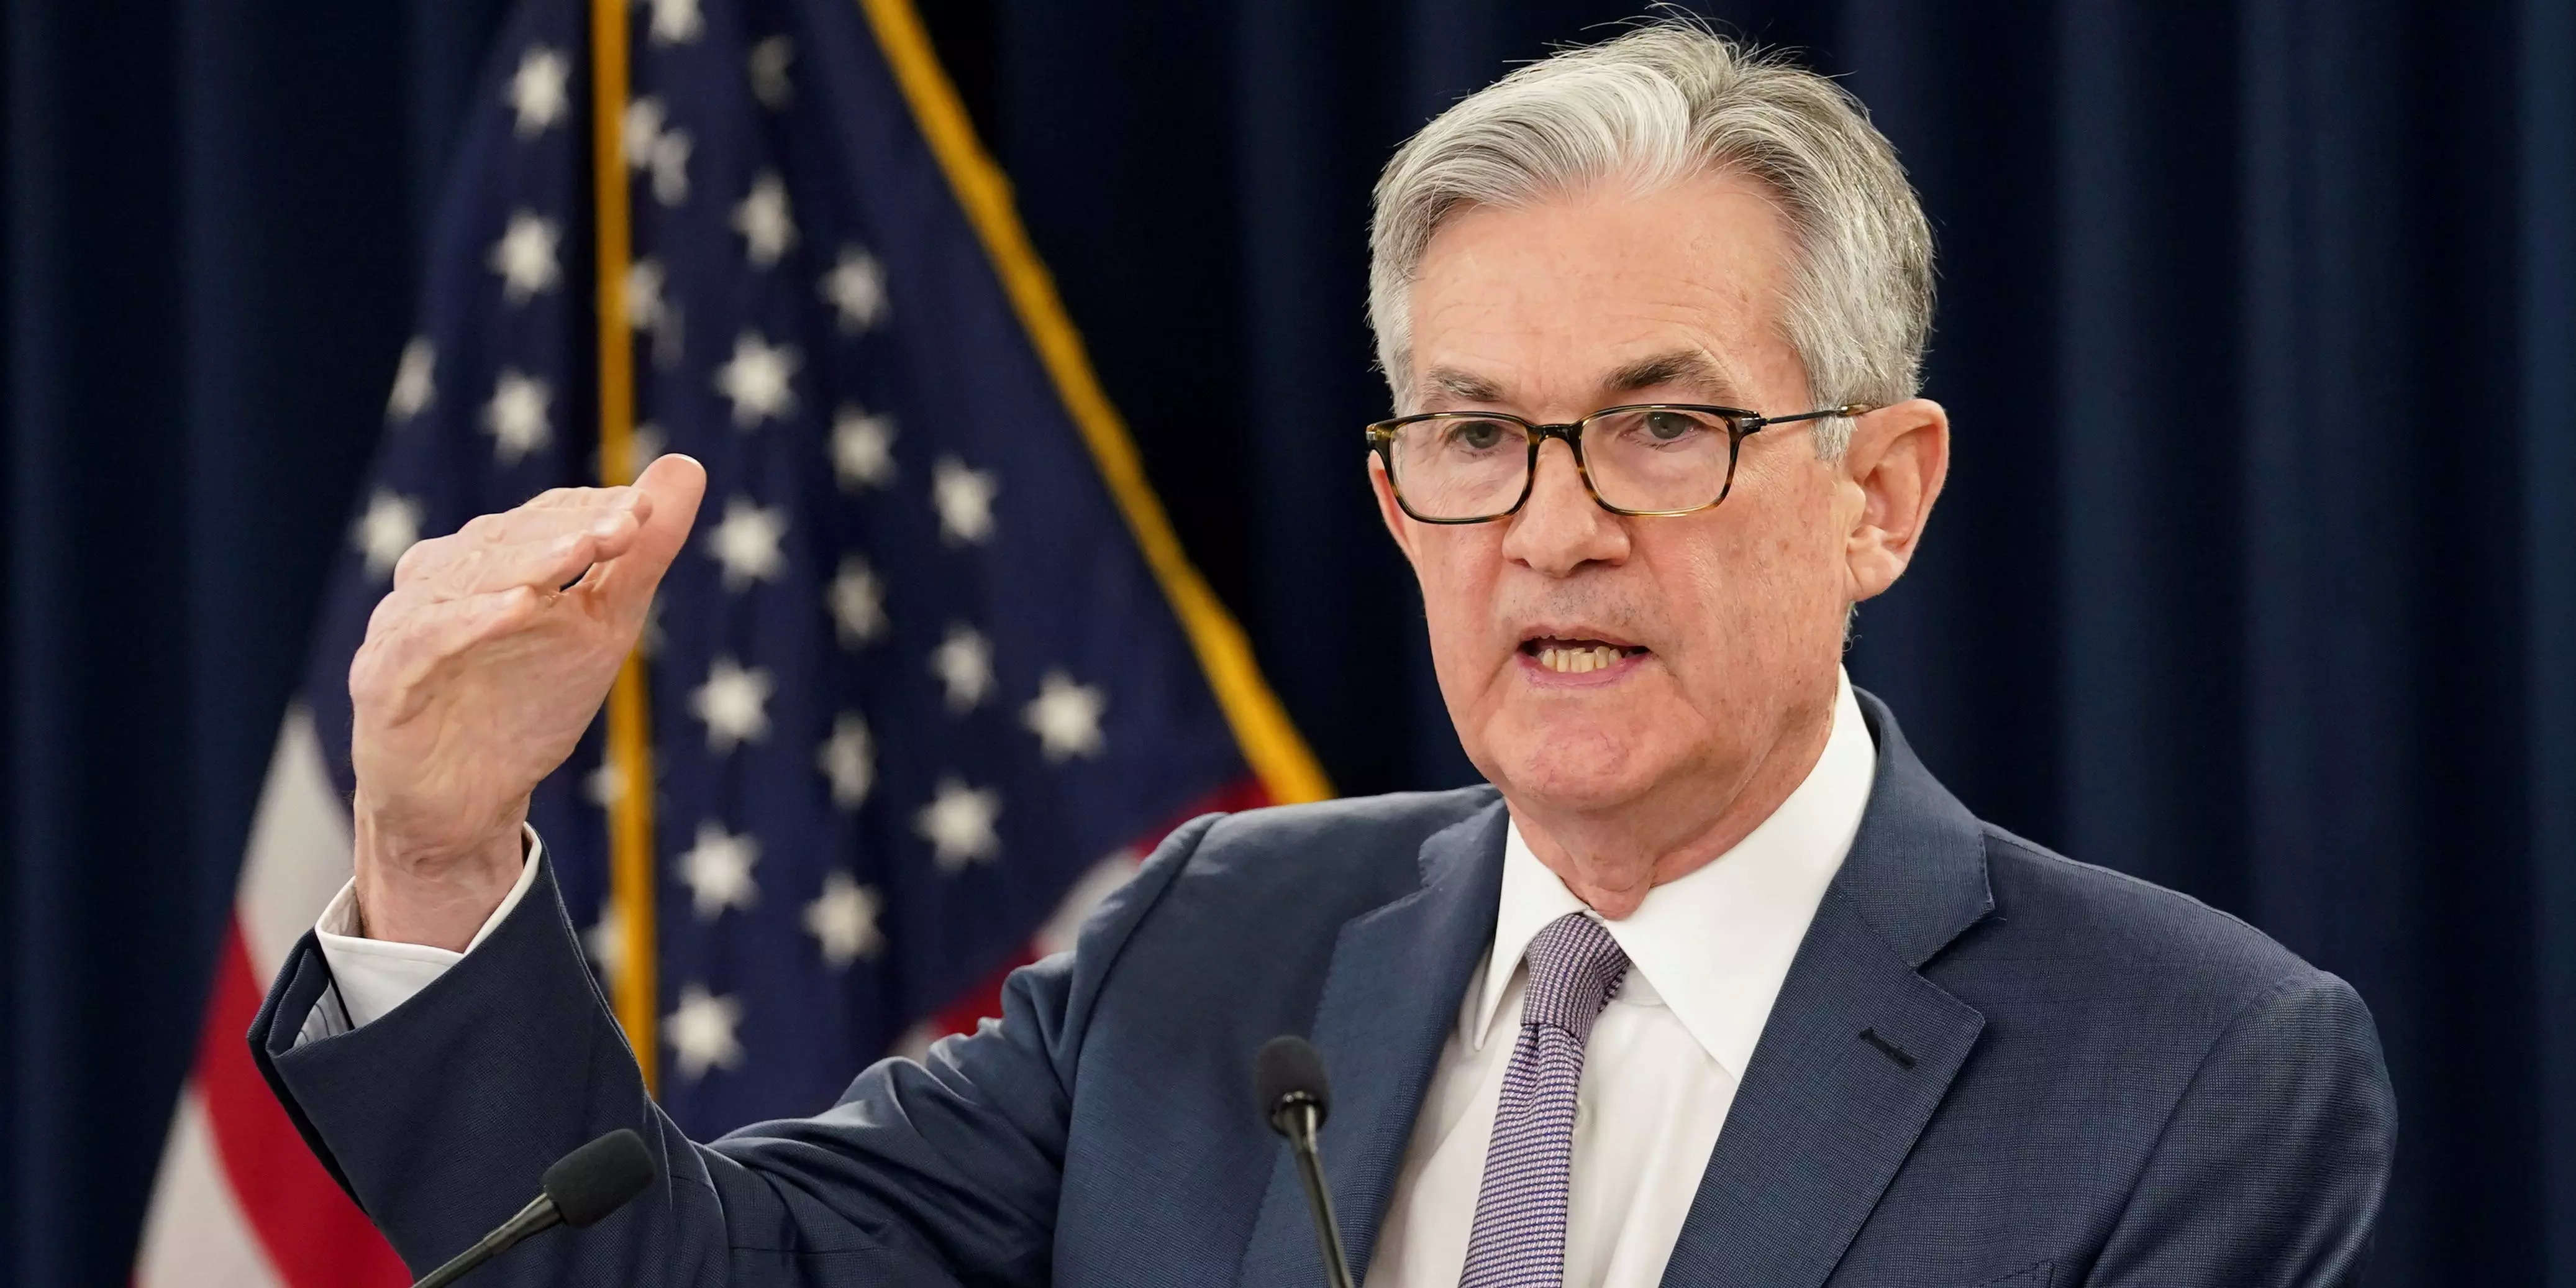 How many times will the Fed cut rates? Here's what Wall Street expects